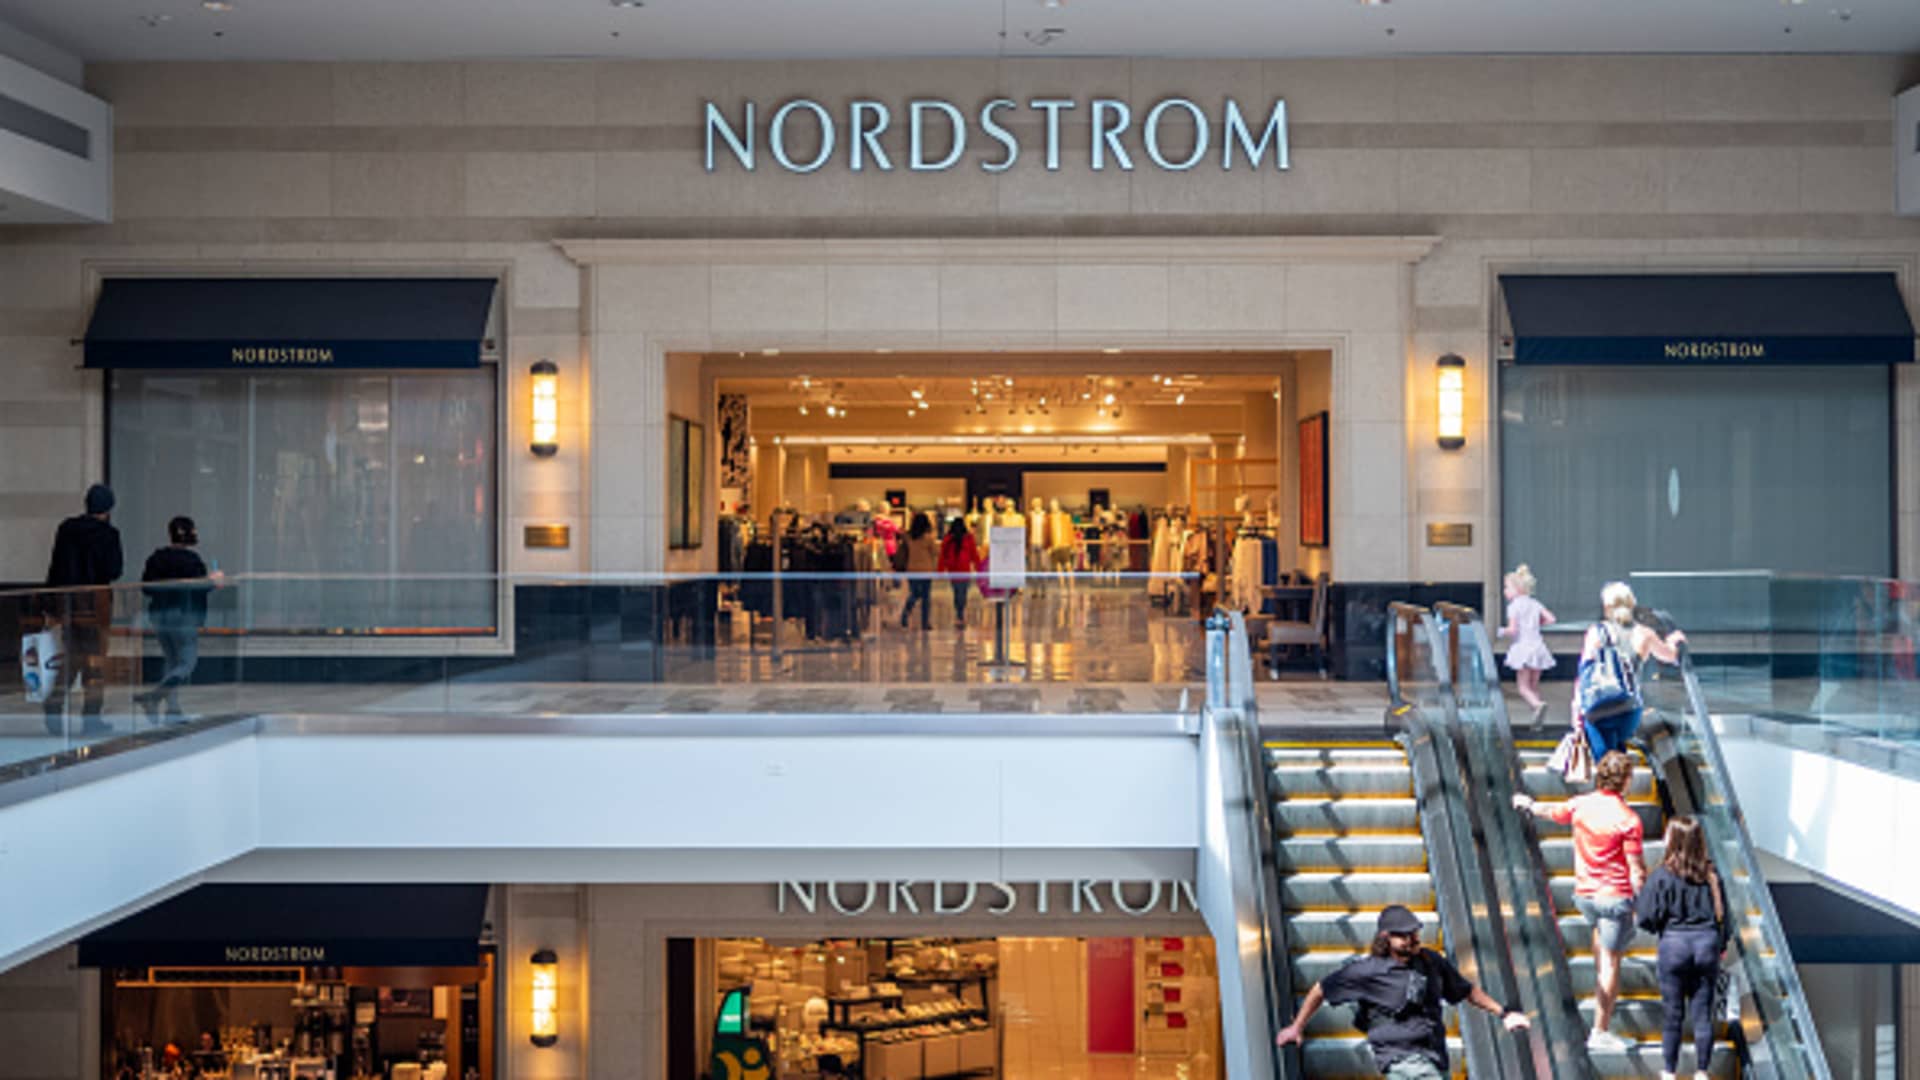 Nordstrom adds dilapidated Nike govt to board as activist battle continues